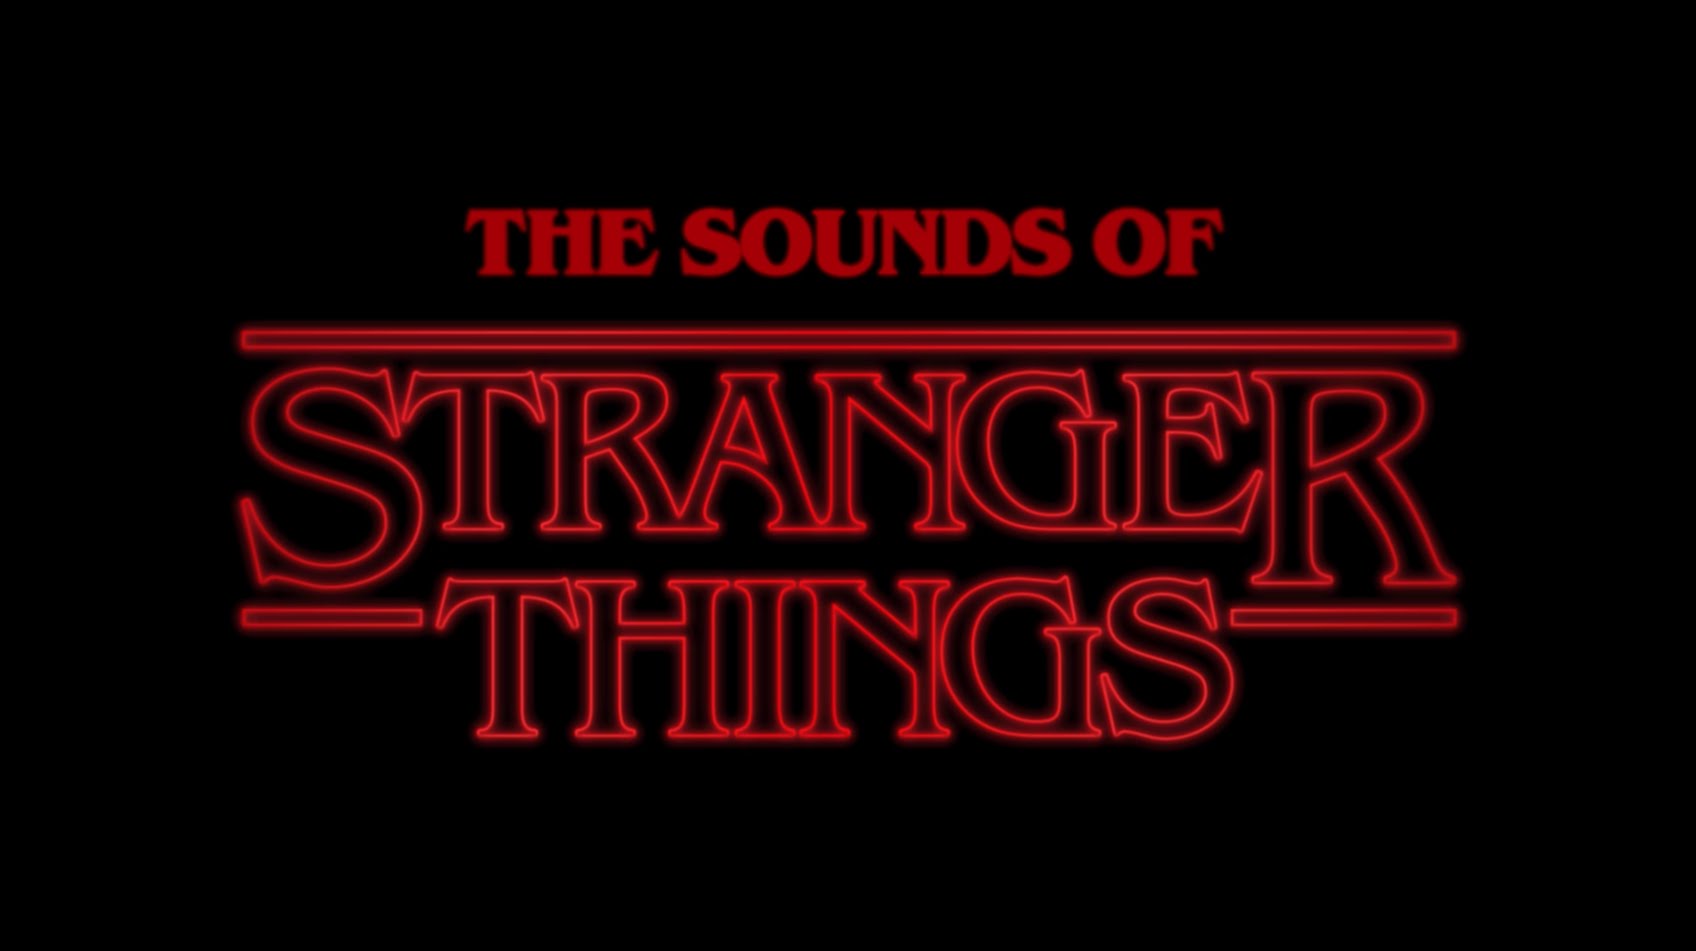 Creating “The Synth Sounds of Stranger Things” Video from Reverb.com